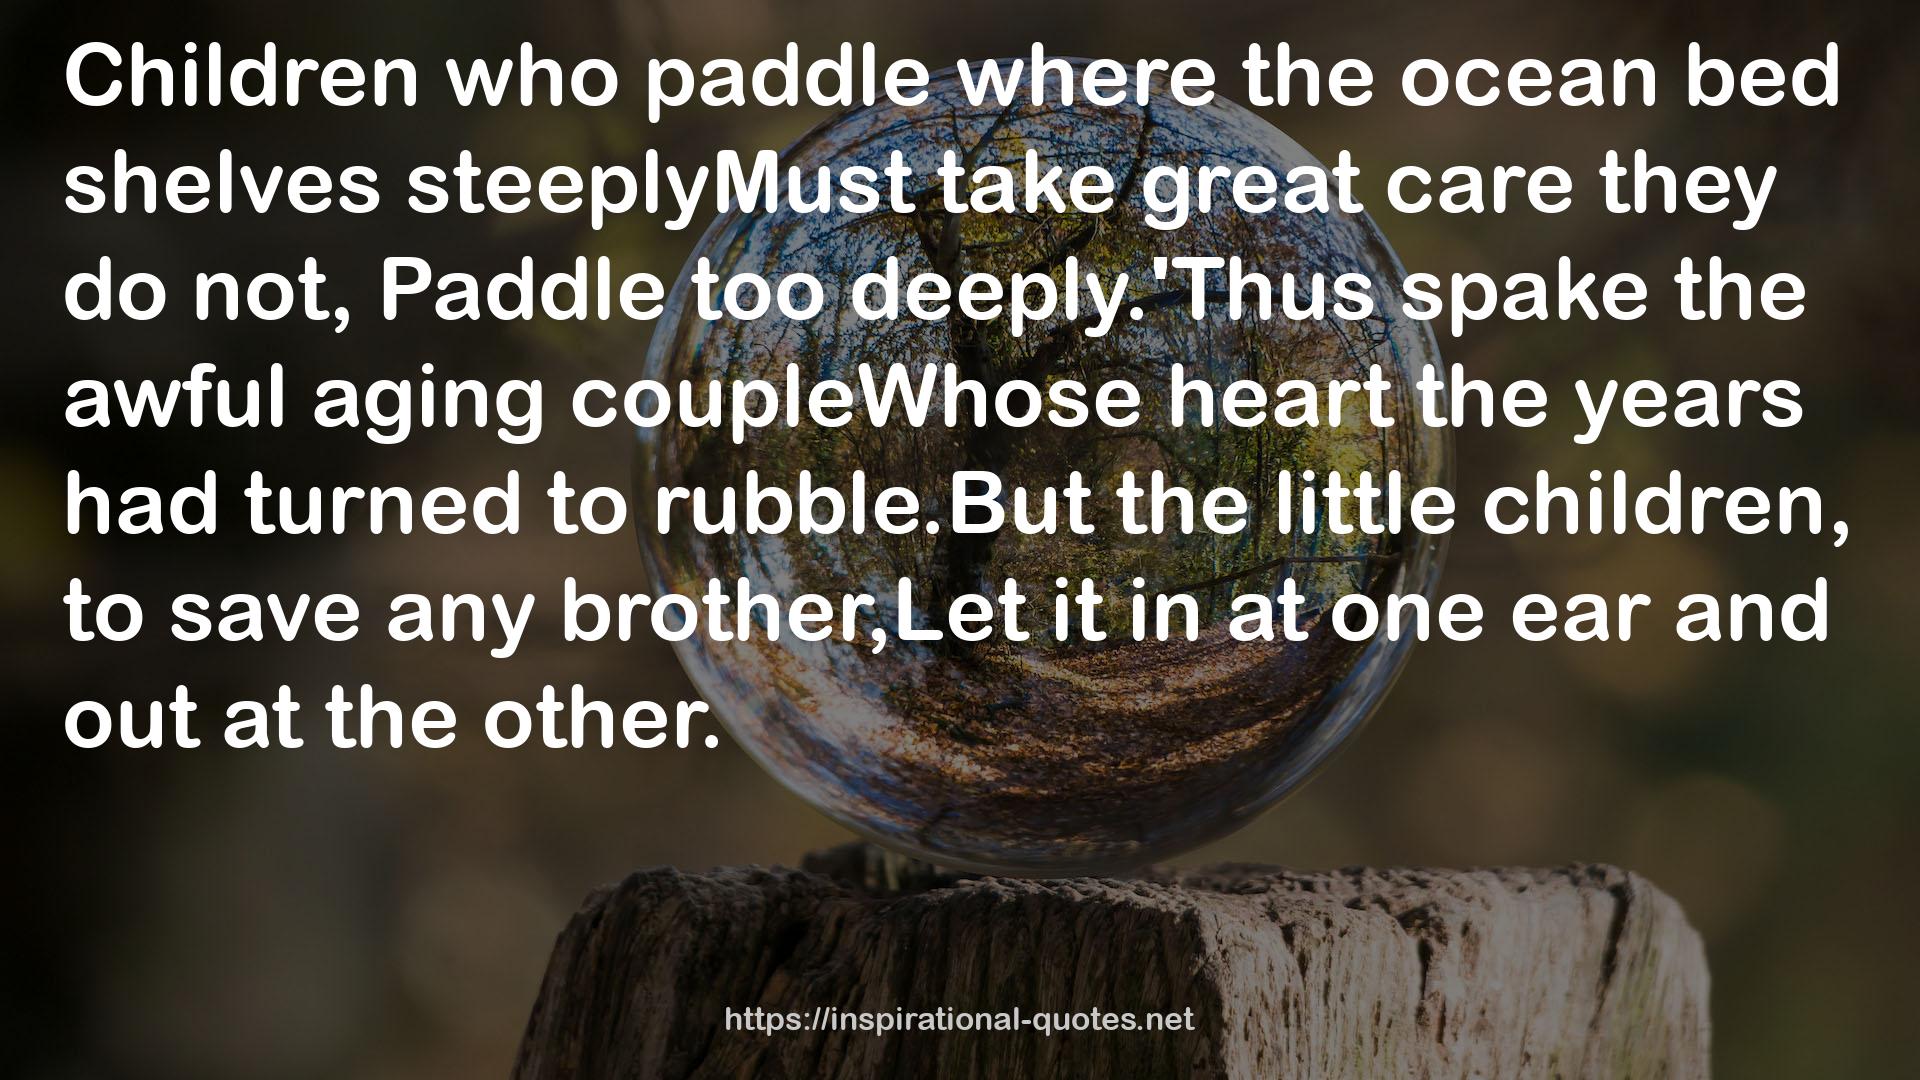 the awful aging coupleWhose heart  QUOTES